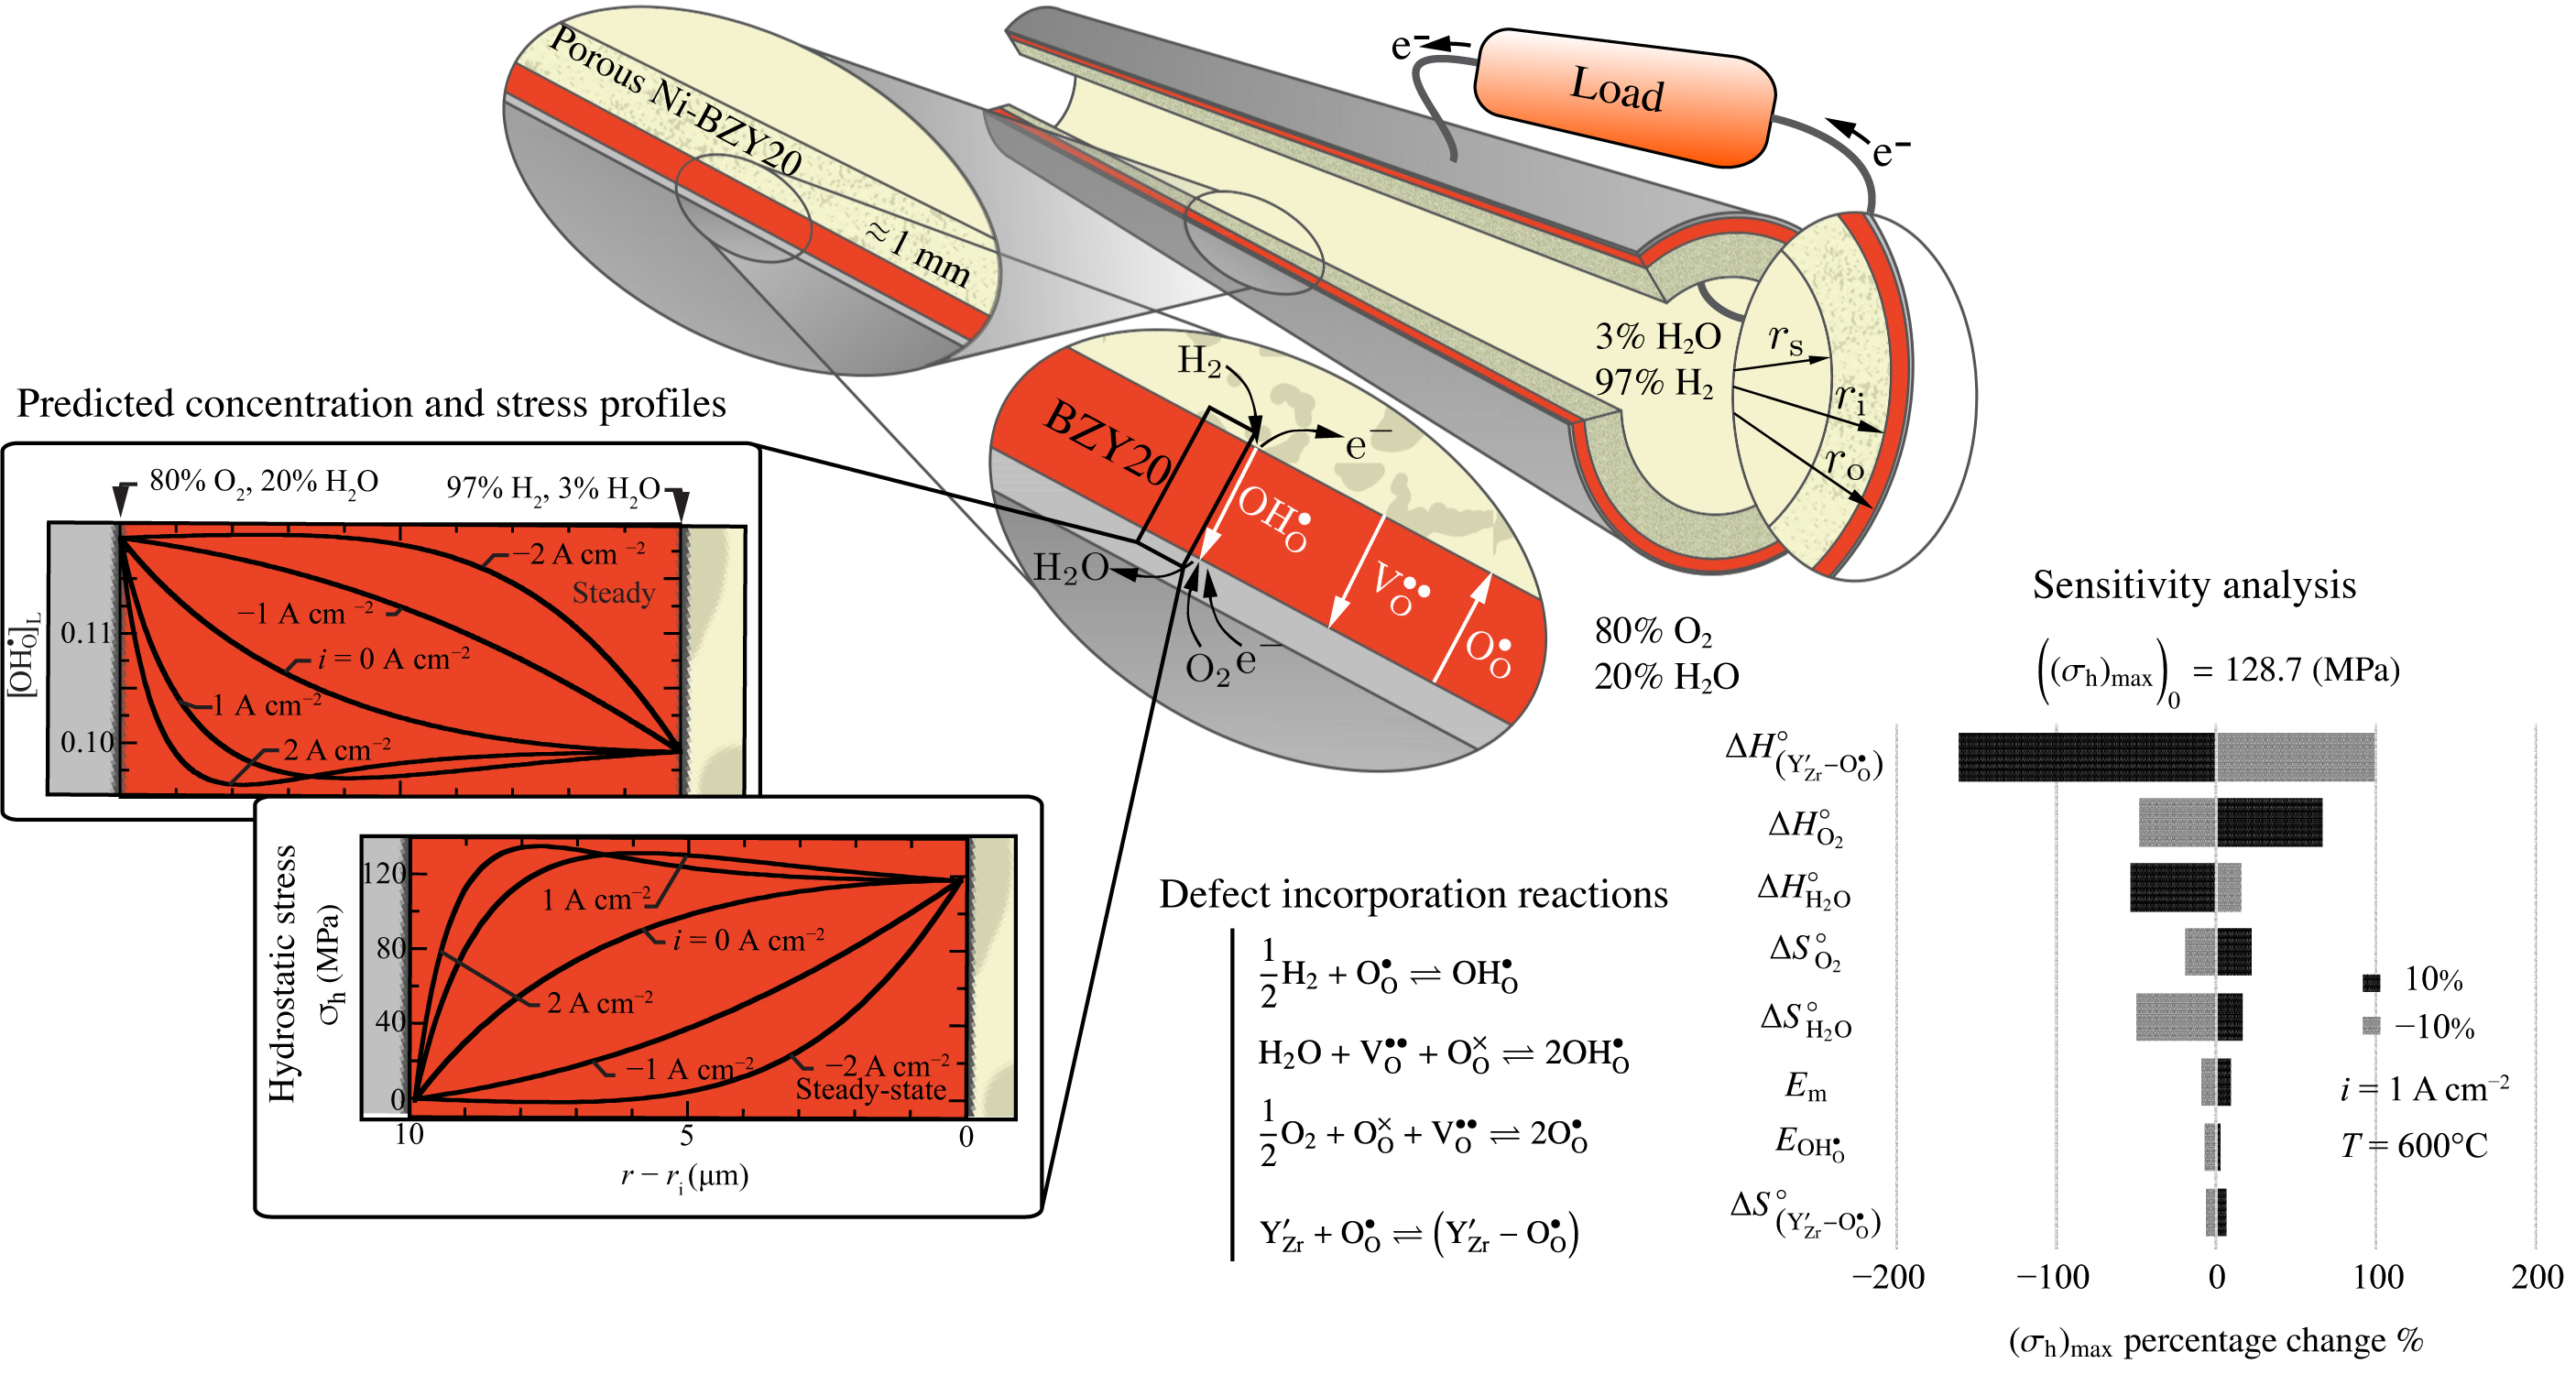 Digital modeling of function and performance of transport amphorae - Hein -  2020 - International Journal of Ceramic Engineering & Science - Wiley  Online Library